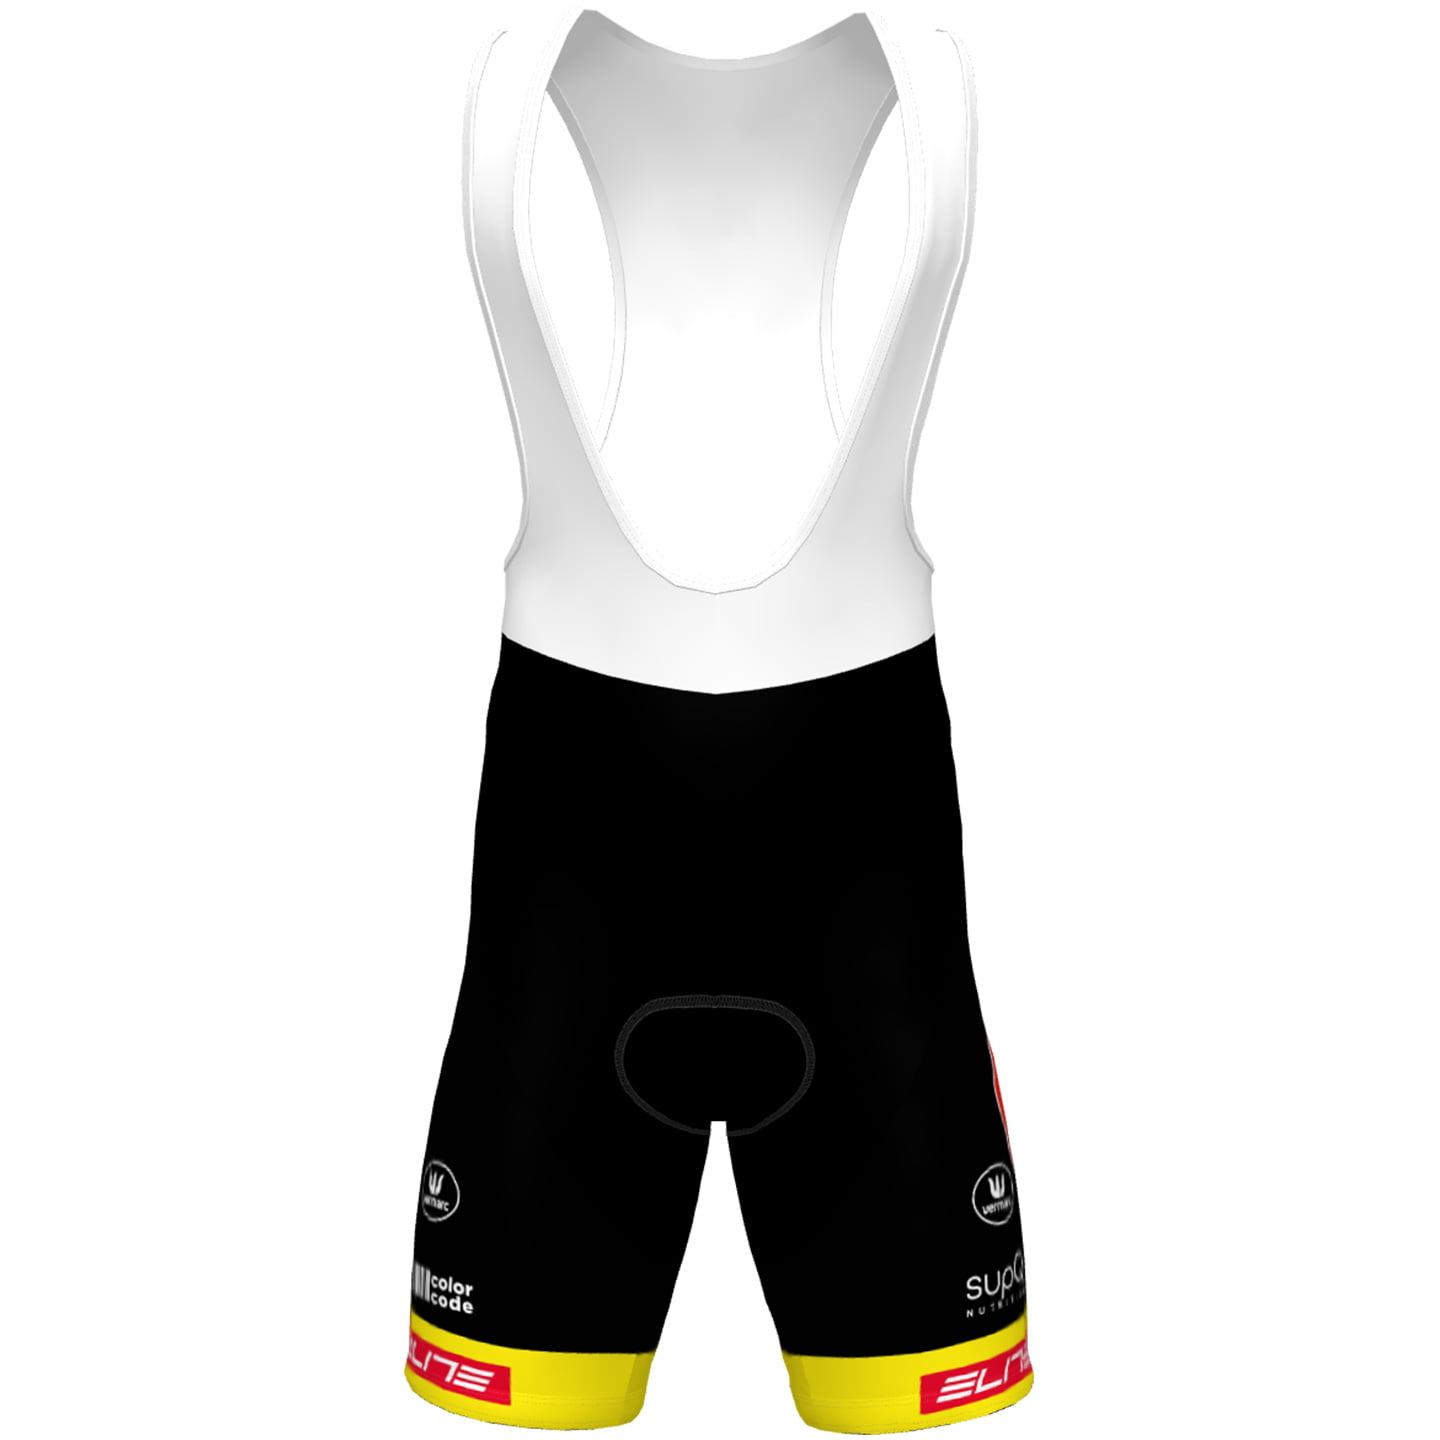 BINGOAL PAUWELS SAUCES WB 2022 Bib Shorts, for men, size XL, Cycle trousers, Cycle clothing